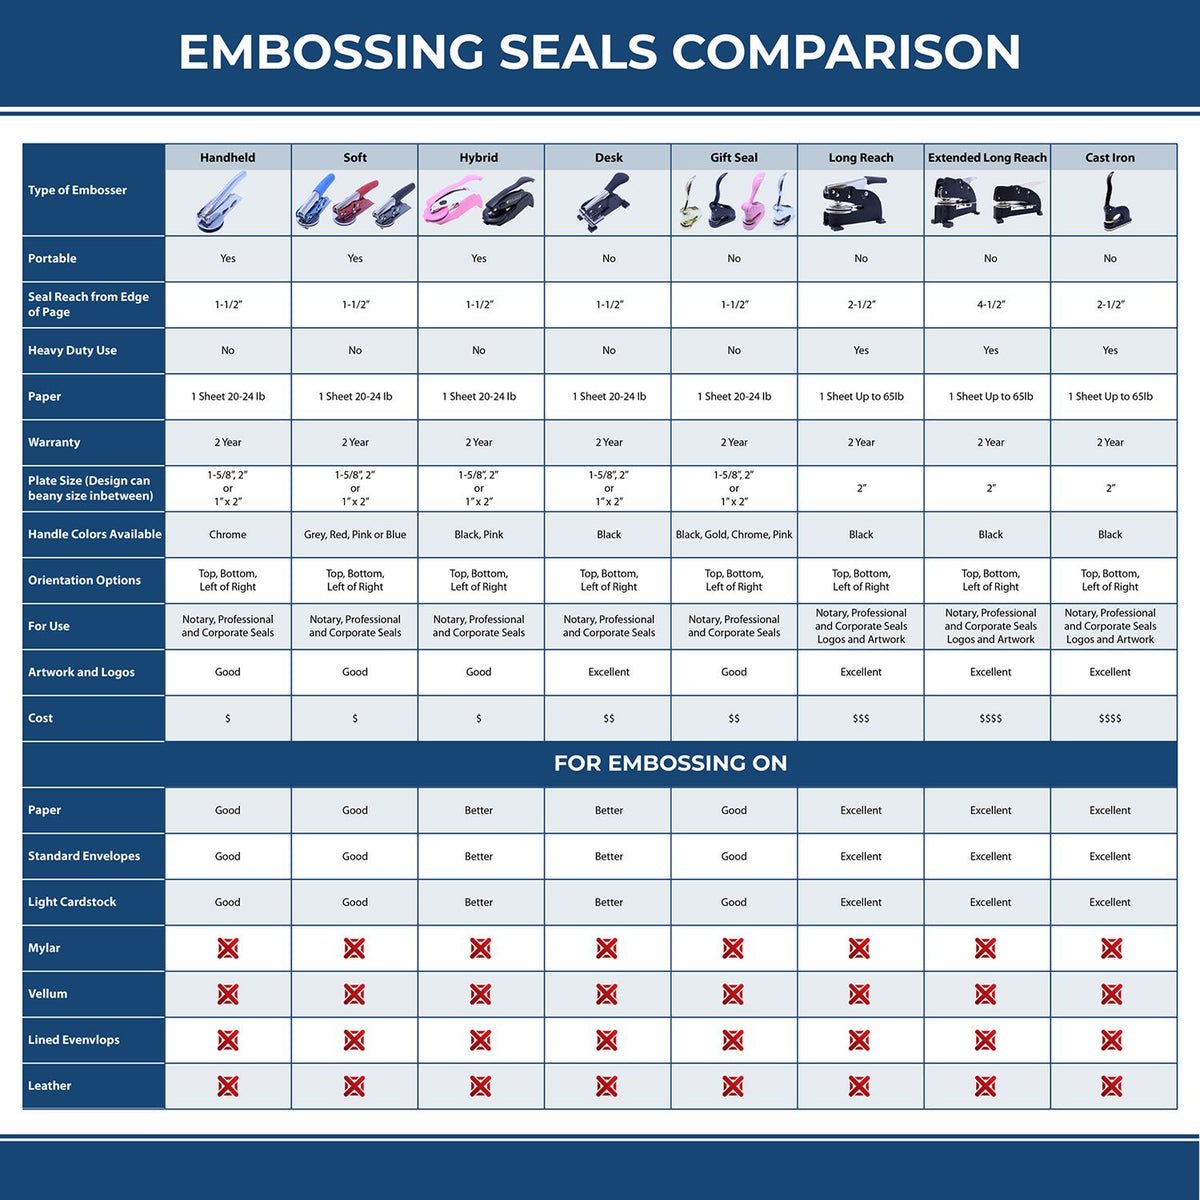 A comparison chart for the different types of mount models available for the Long Reach Montana PE Seal.